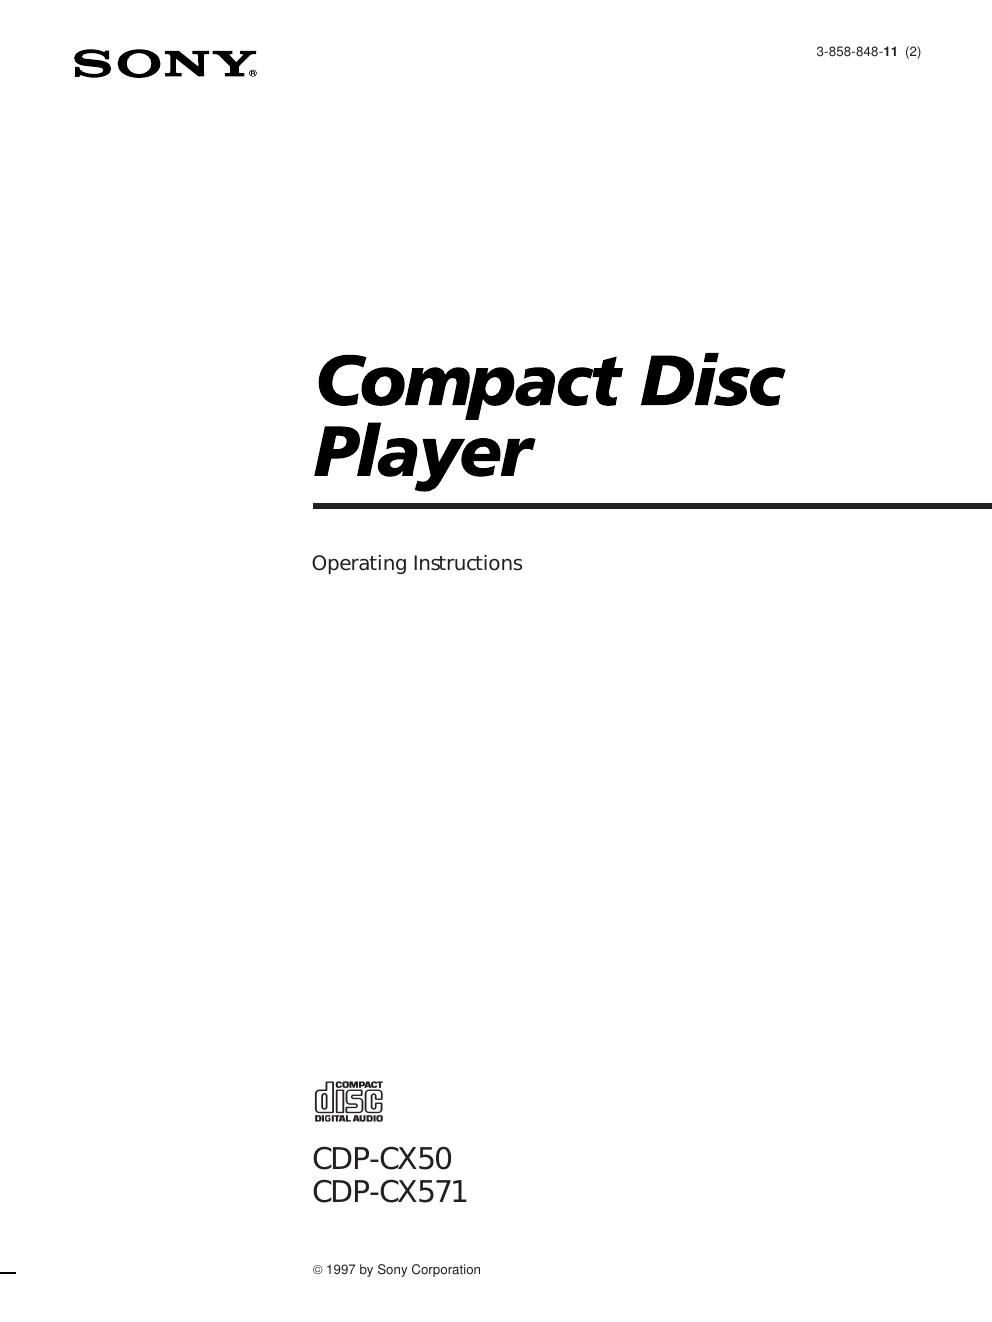 sony cdp cx 50 owners manual